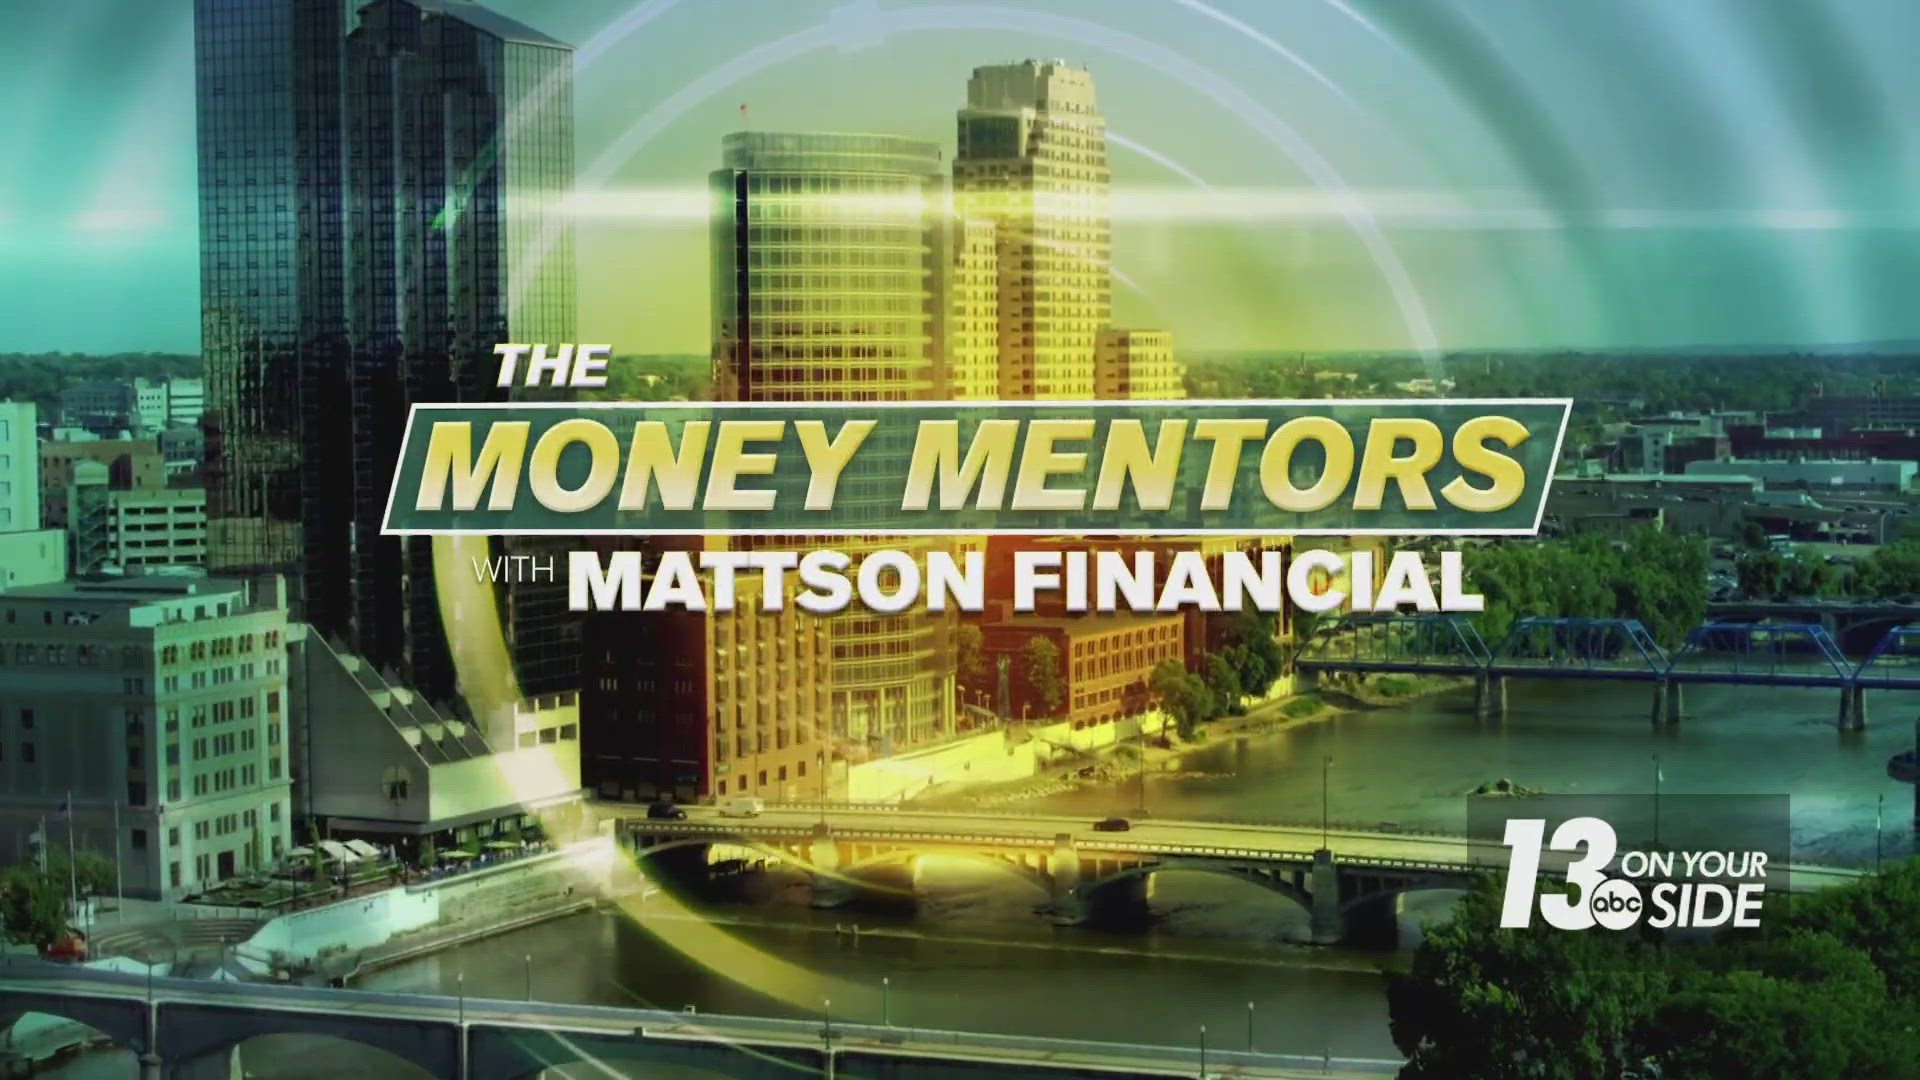 Gary Mattson and Laurel Steward, the father-daughter team at Mattson Financial Services, answered some of the most-asked questions about retirement.